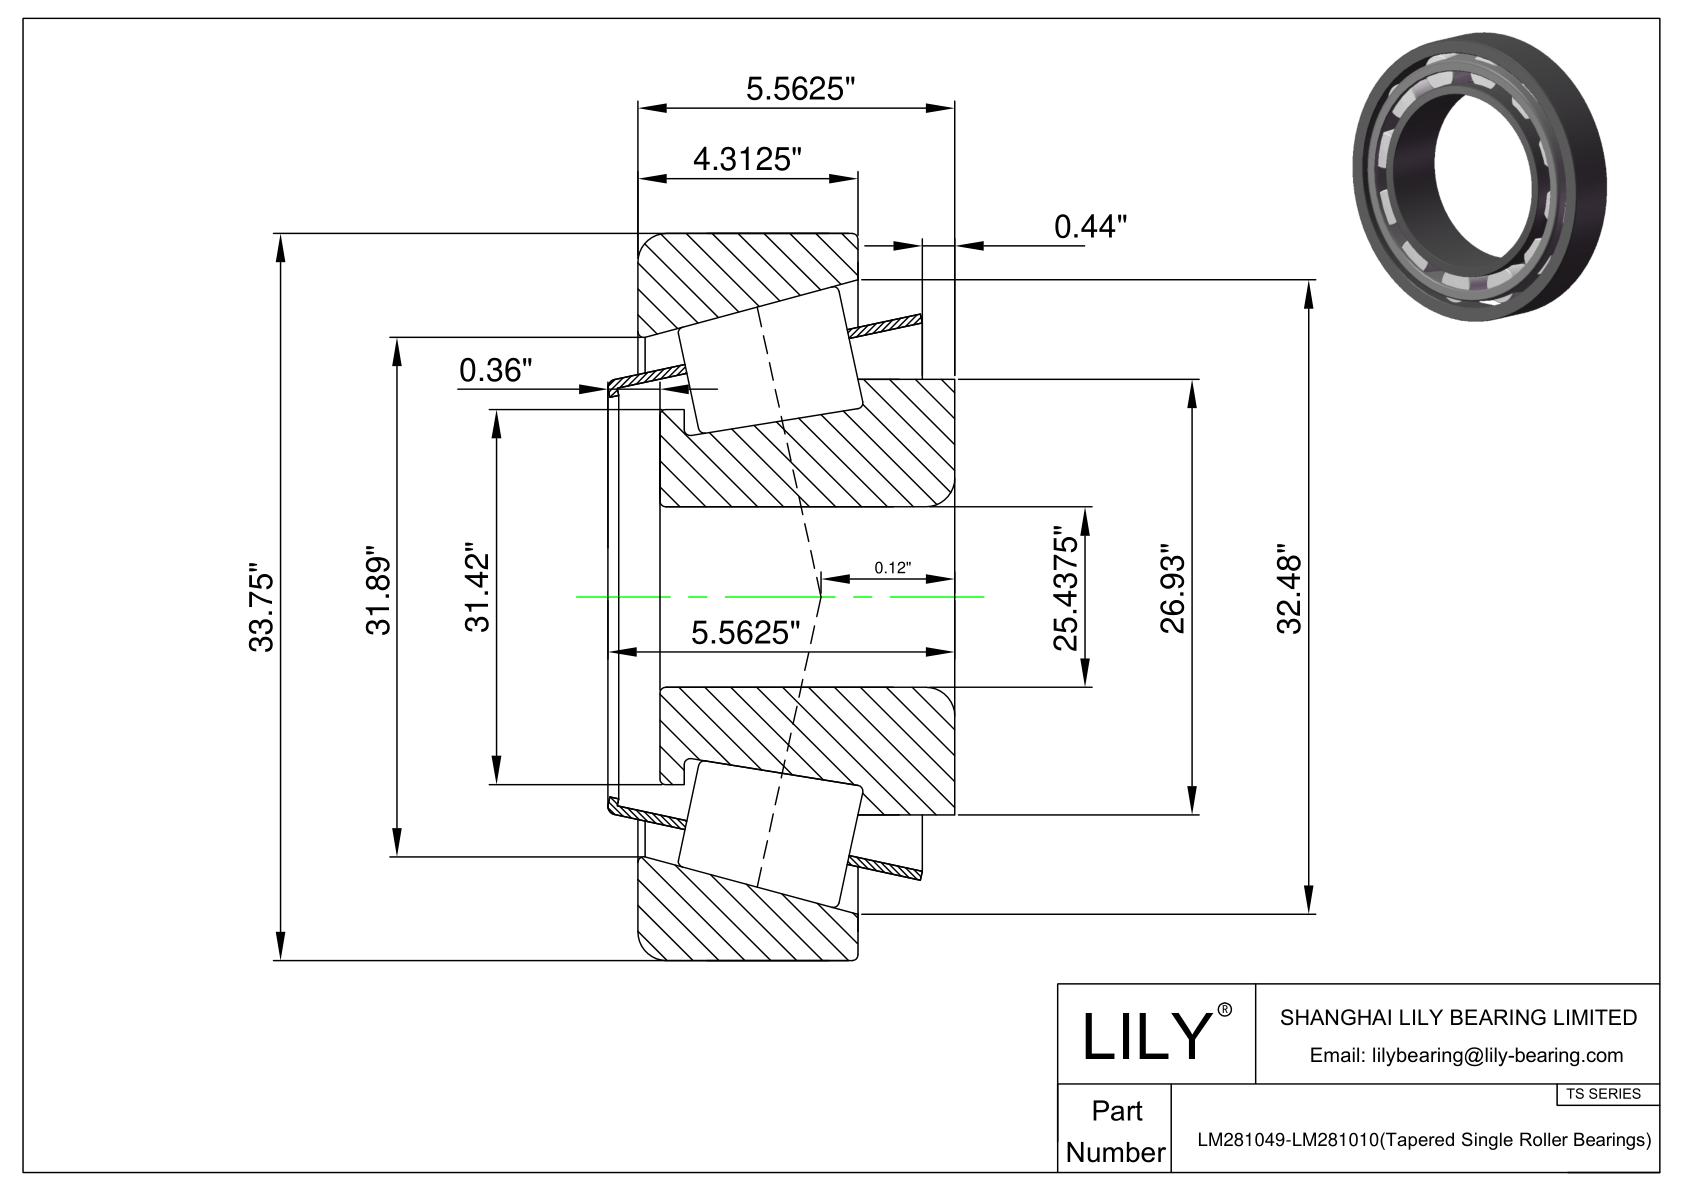 LM281049-LM281010 TS (Tapered Single Roller Bearings) (Imperial) cad drawing